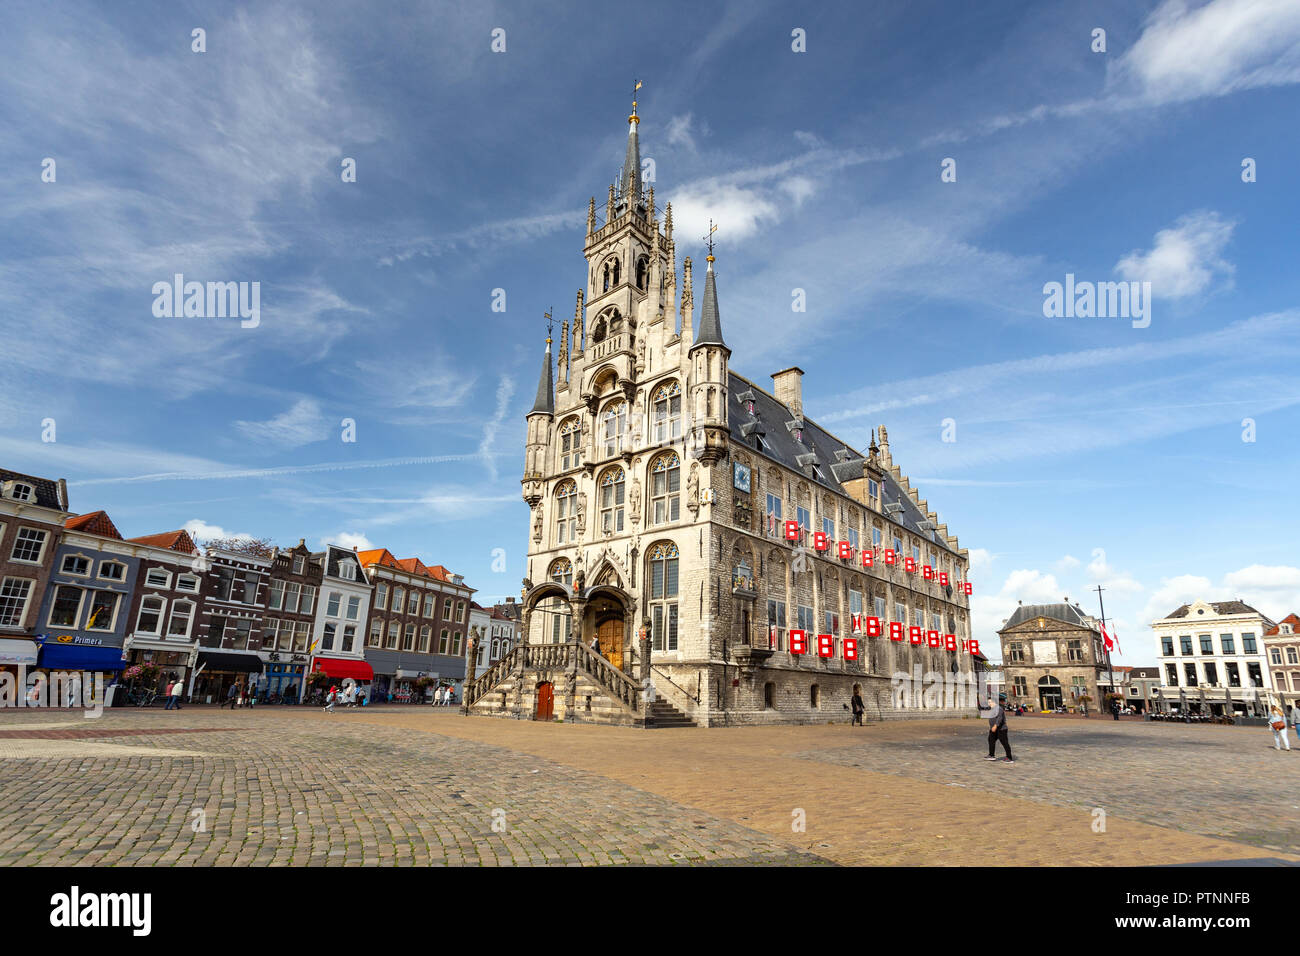 THE NETHERLANDS, GOUDA - OCTOBER 10, 2018: The beautiful gothic Town hall of Gouda. Stock Photo